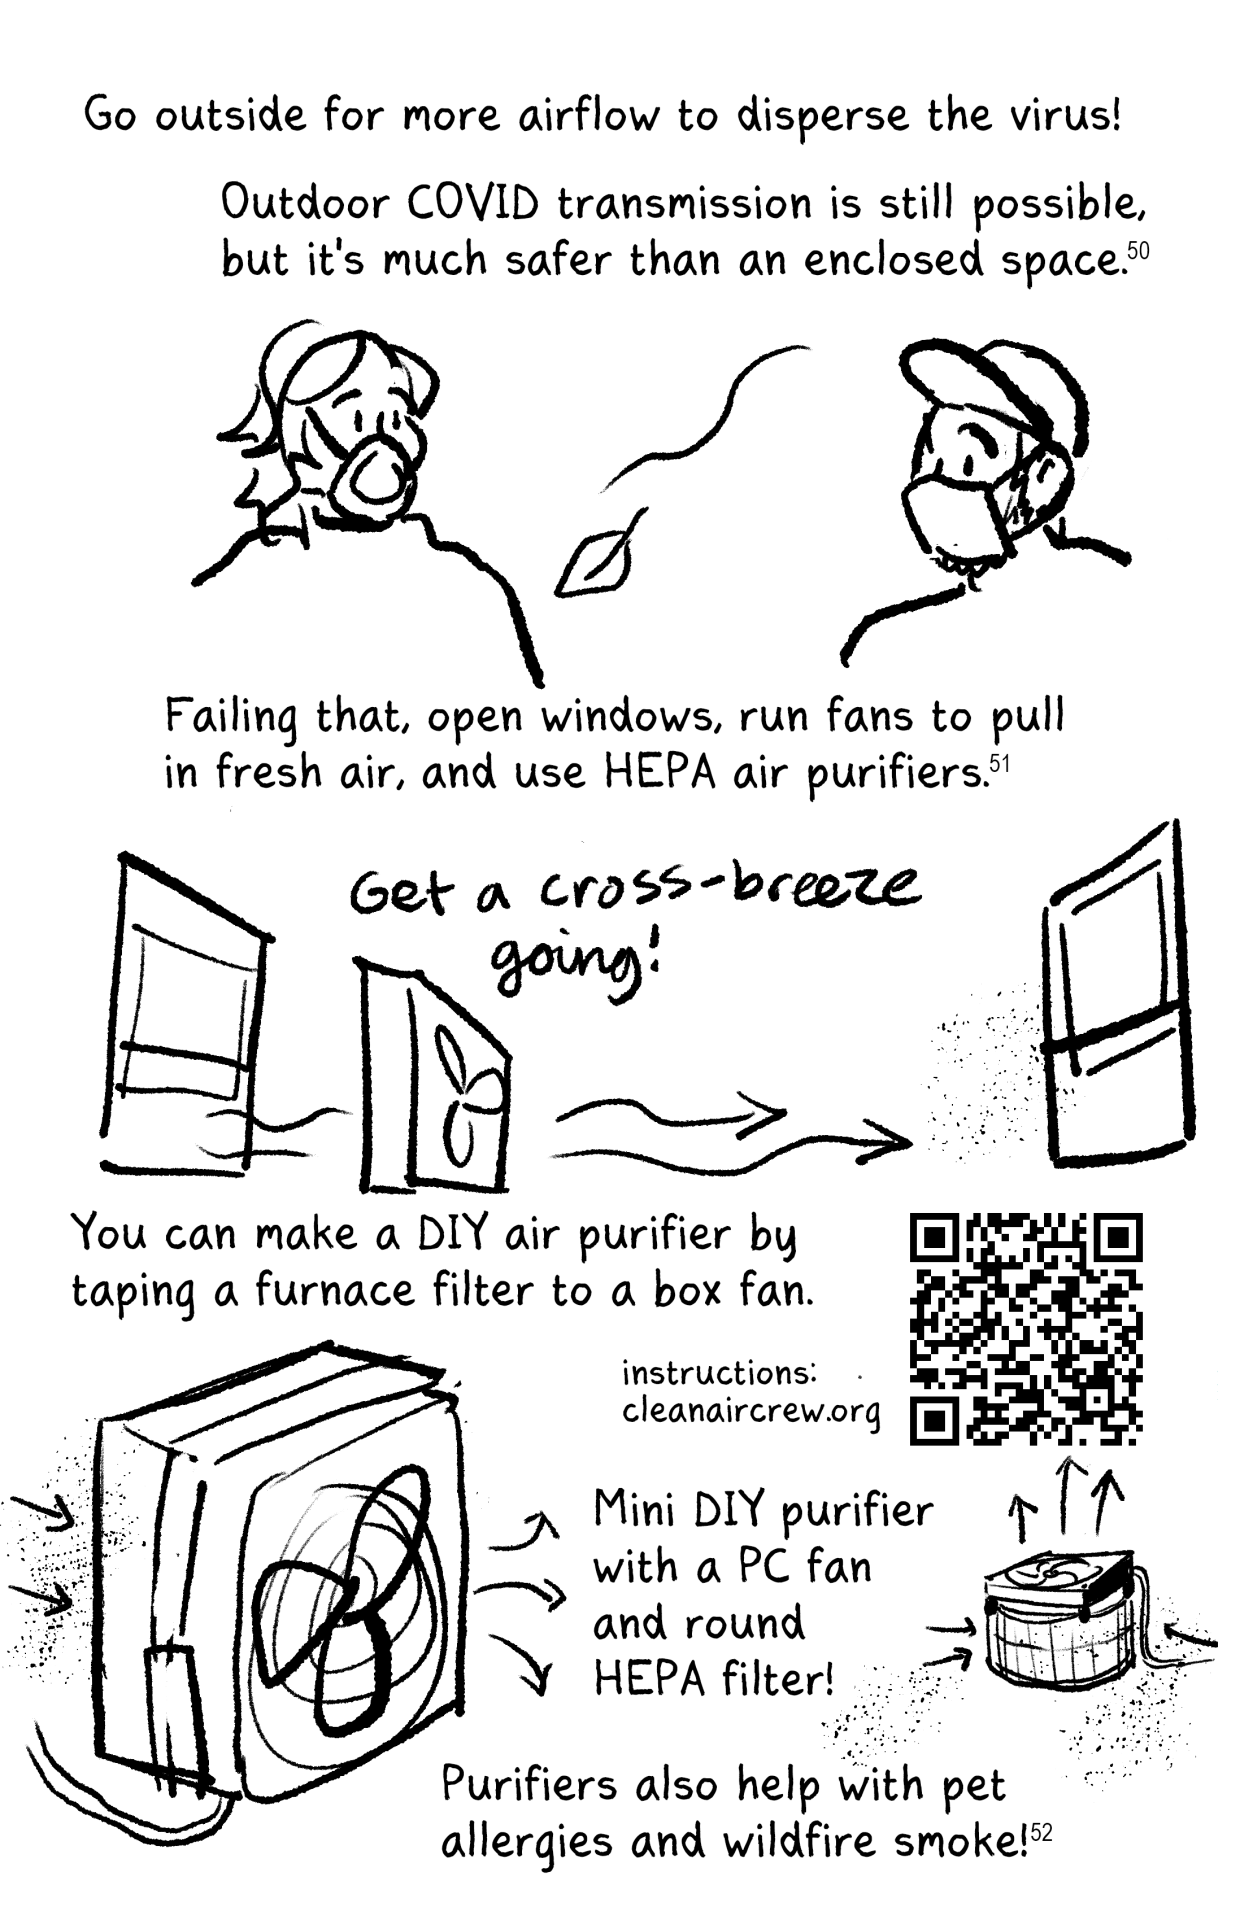 COVID zine page 11  Go outside for more airflow to disperse the virus!  Outdoor COVID transmission is still possible, but it's much safer than an enclosed space.  [Cartoon of me and a friend, both wearing masks. A leaf is blowing between us; evidently we're outside]  Failing that, open windows, run fans to pull in fresh air, and use HEPA air purifiers. Get a cross-breeze going!  [Cartoon diagram of two open windows with a box fan in between, pulling clean air in from one window and blowing indoor air out the other window.]  You can make a DIY air purifier by taping a furnace filter to a box fan.  Instructions: cleanaircrew.org [QR code]  Mini DIY purifier with a PC fan and a round HEPA filter!  [Cartoons of furnace filter taped to a box fan, and a round filter with a PC fan on top.]  Purifiers also help with pet allergies and wildfire smoke!